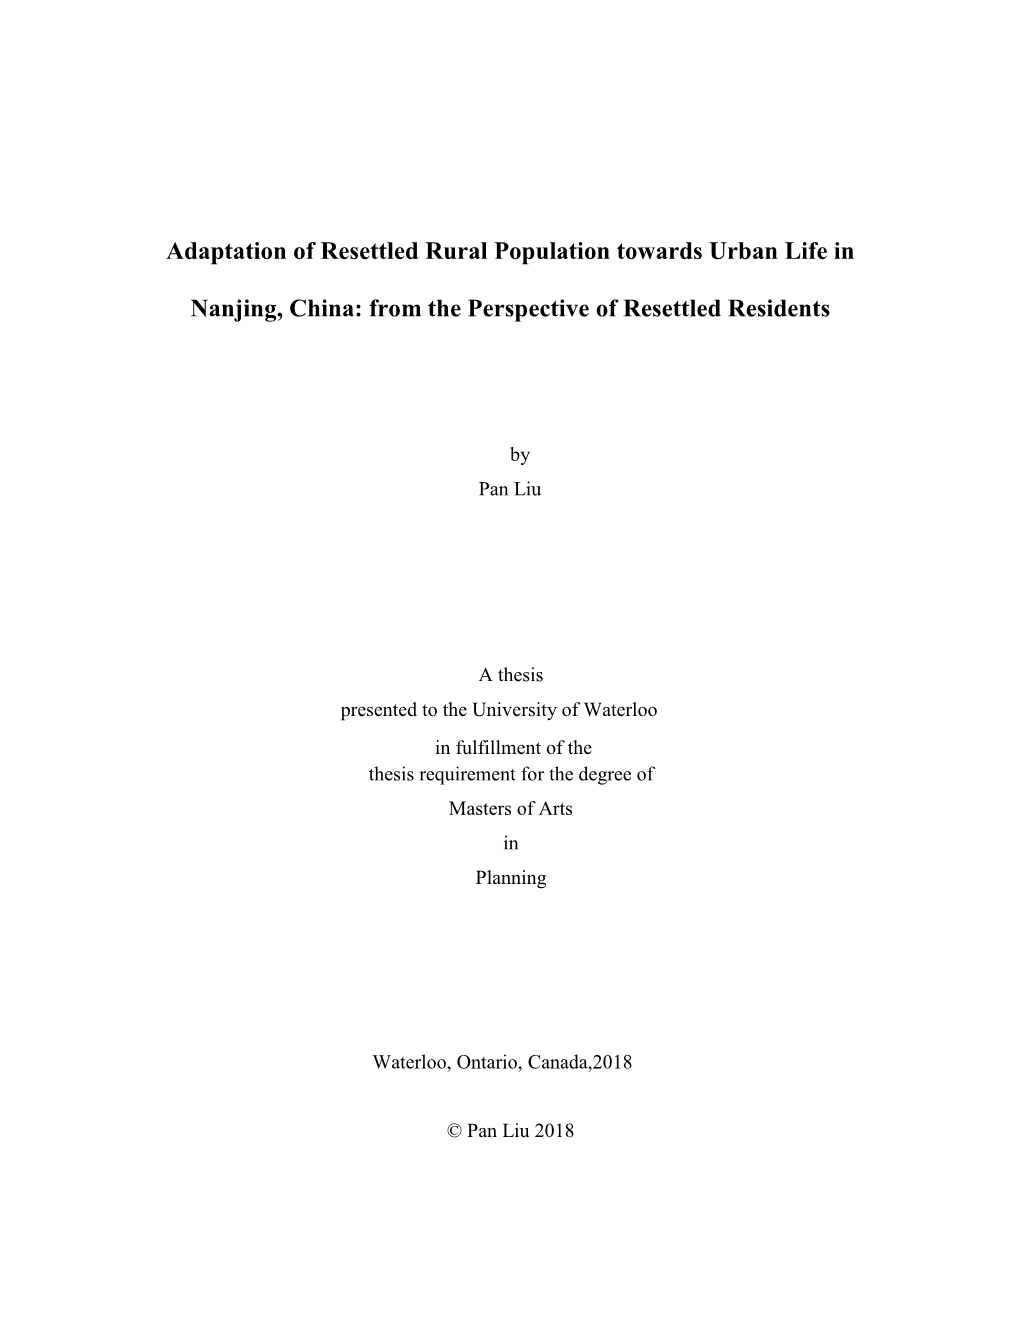 Adaptation of Resettled Rural Population Towards Urban Life In